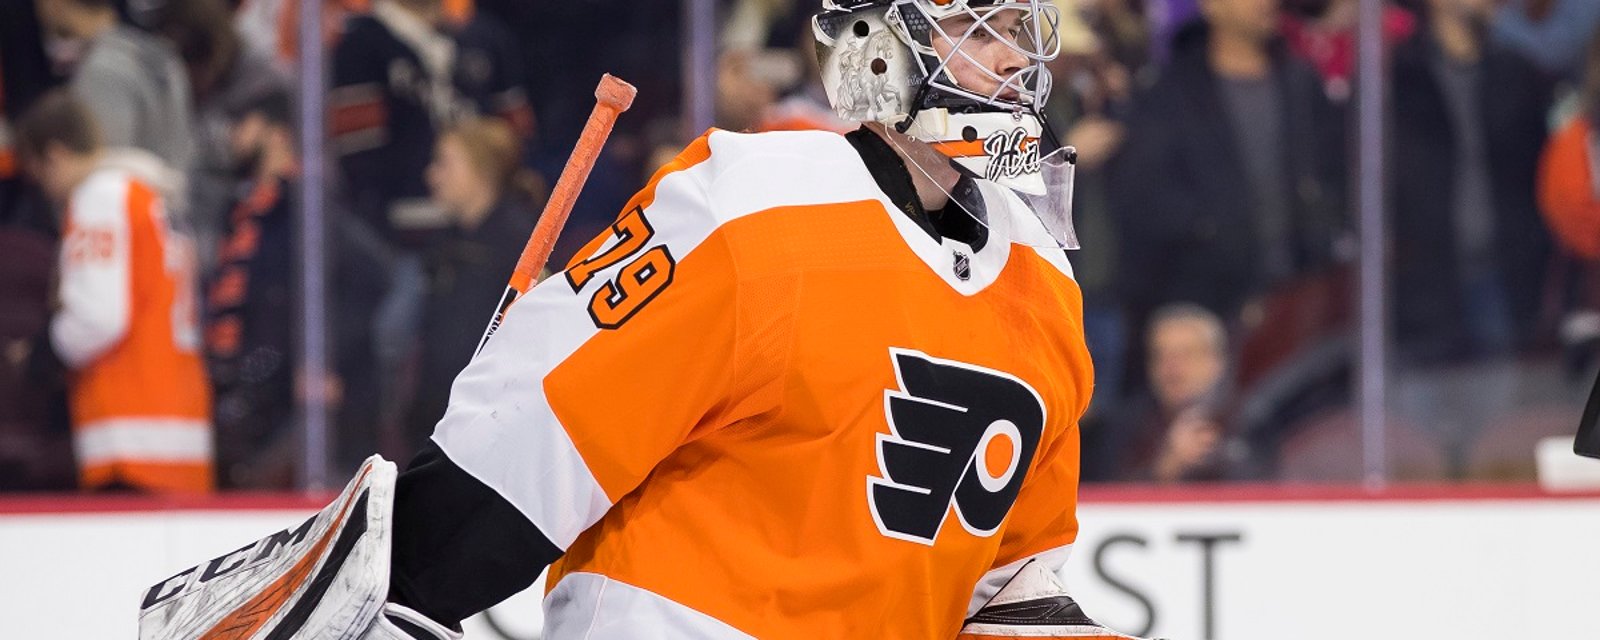 Daniel Briere confirms he will listen to offers for Carter Hart.